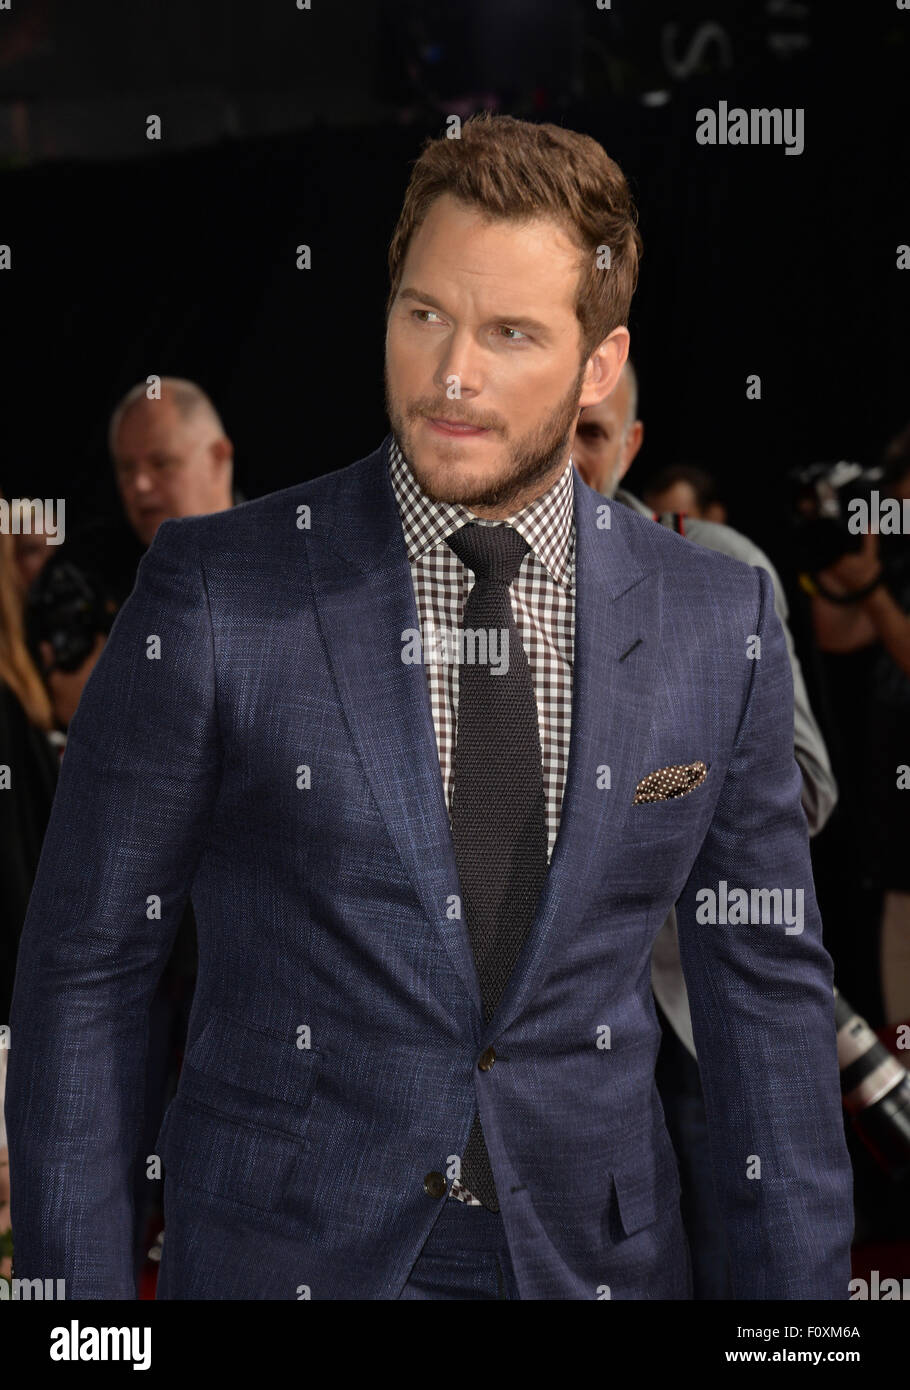 LOS ANGELES, CA - JUNE 10, 2015: Chris Pratt at the world premiere of his movie 'Jurassic World' at the Dolby Theatre, Hollywood. Stock Photo